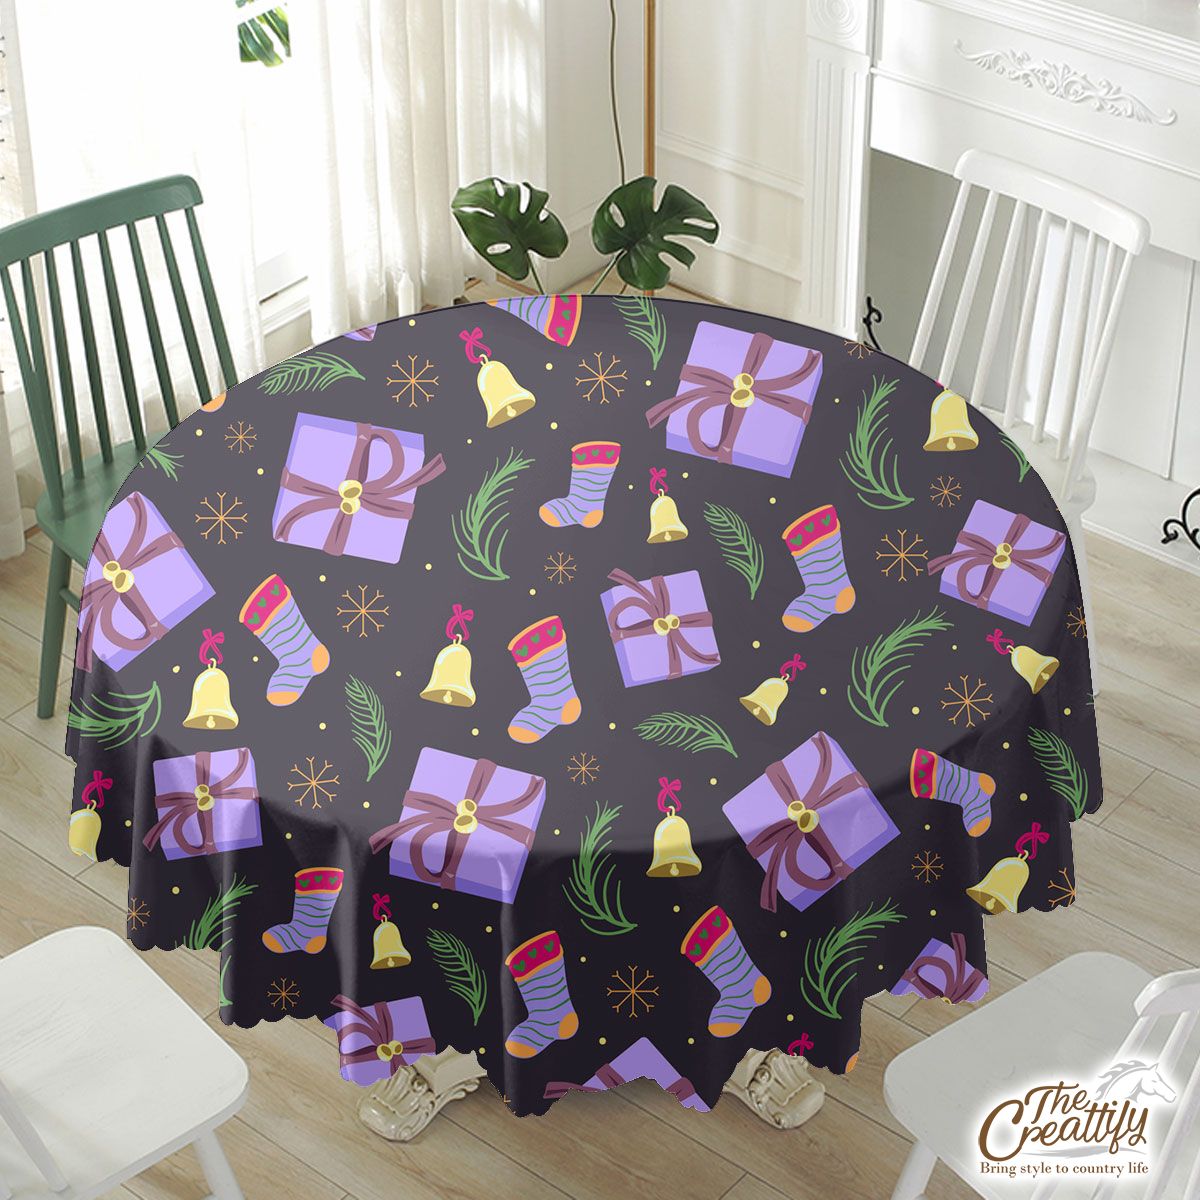 Purple Christmas Gifts And Socks With Bells On The Snowflake Dark Background Waterproof Tablecloth